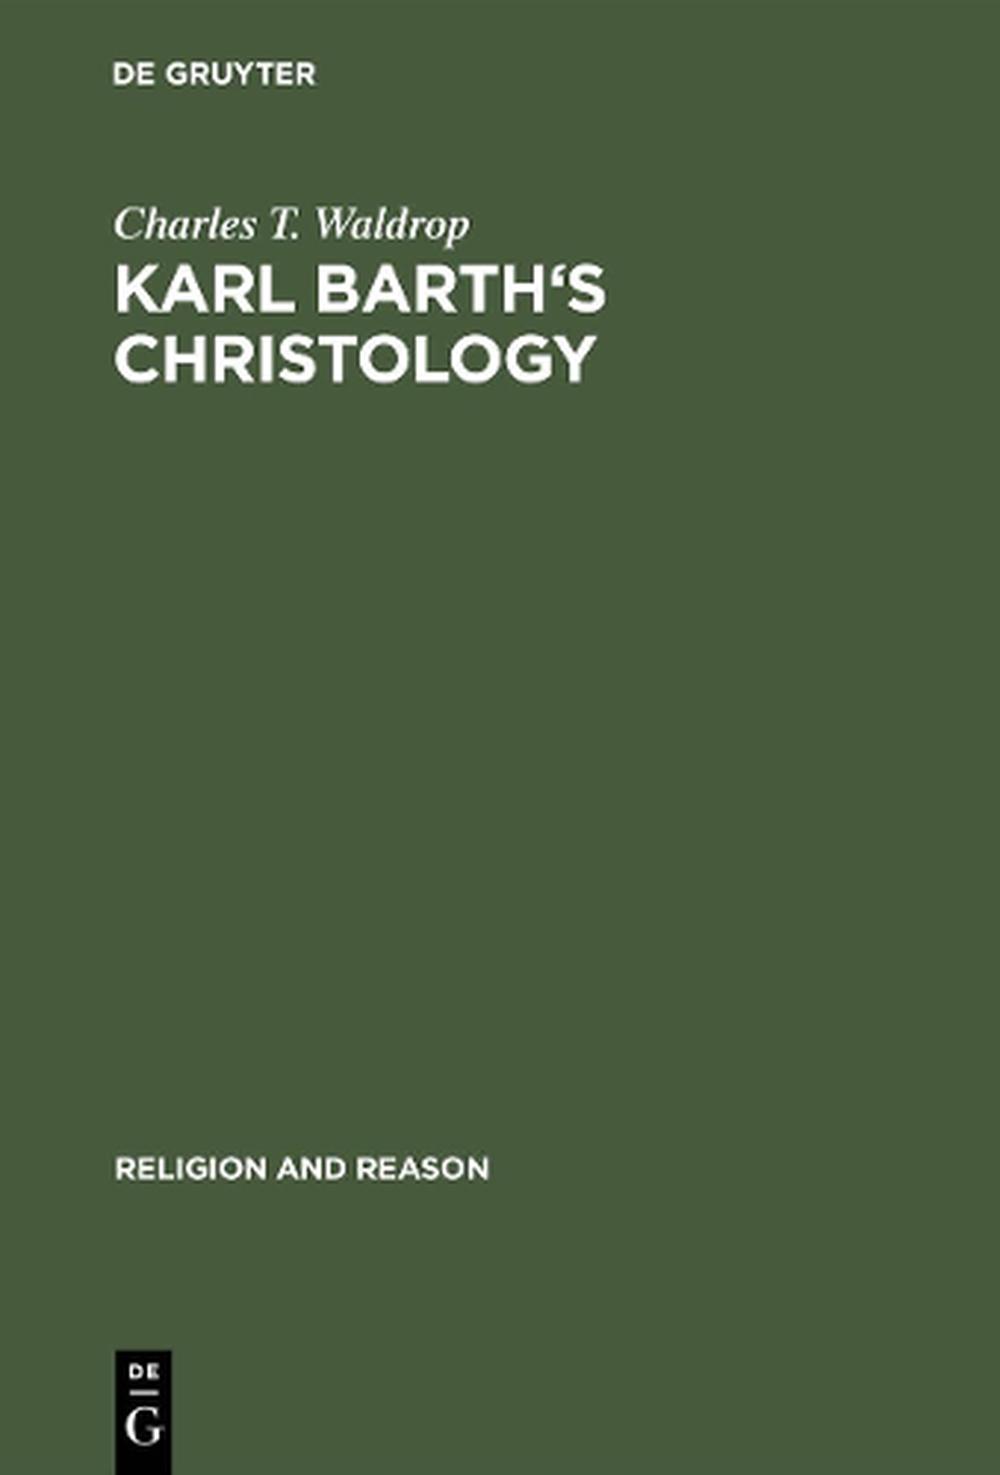 Karl Barth's Christology: Its Basic Alexandrian Character by Charles T ...